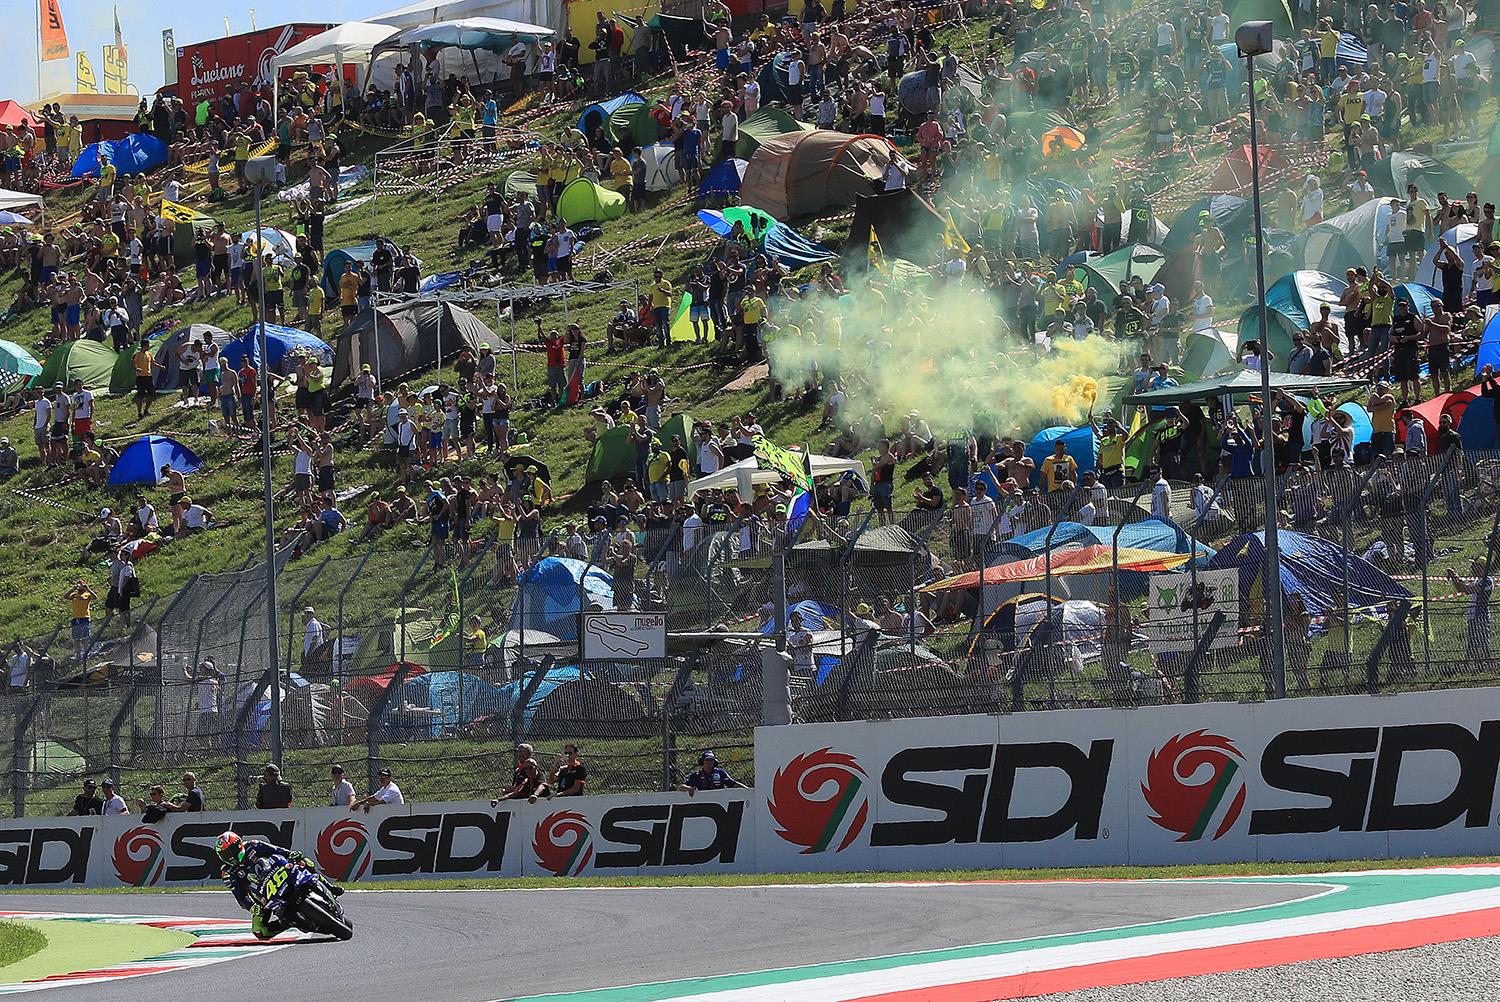 MotoGP: Rossi breaks dry spell with pole position in Mugello | MCN